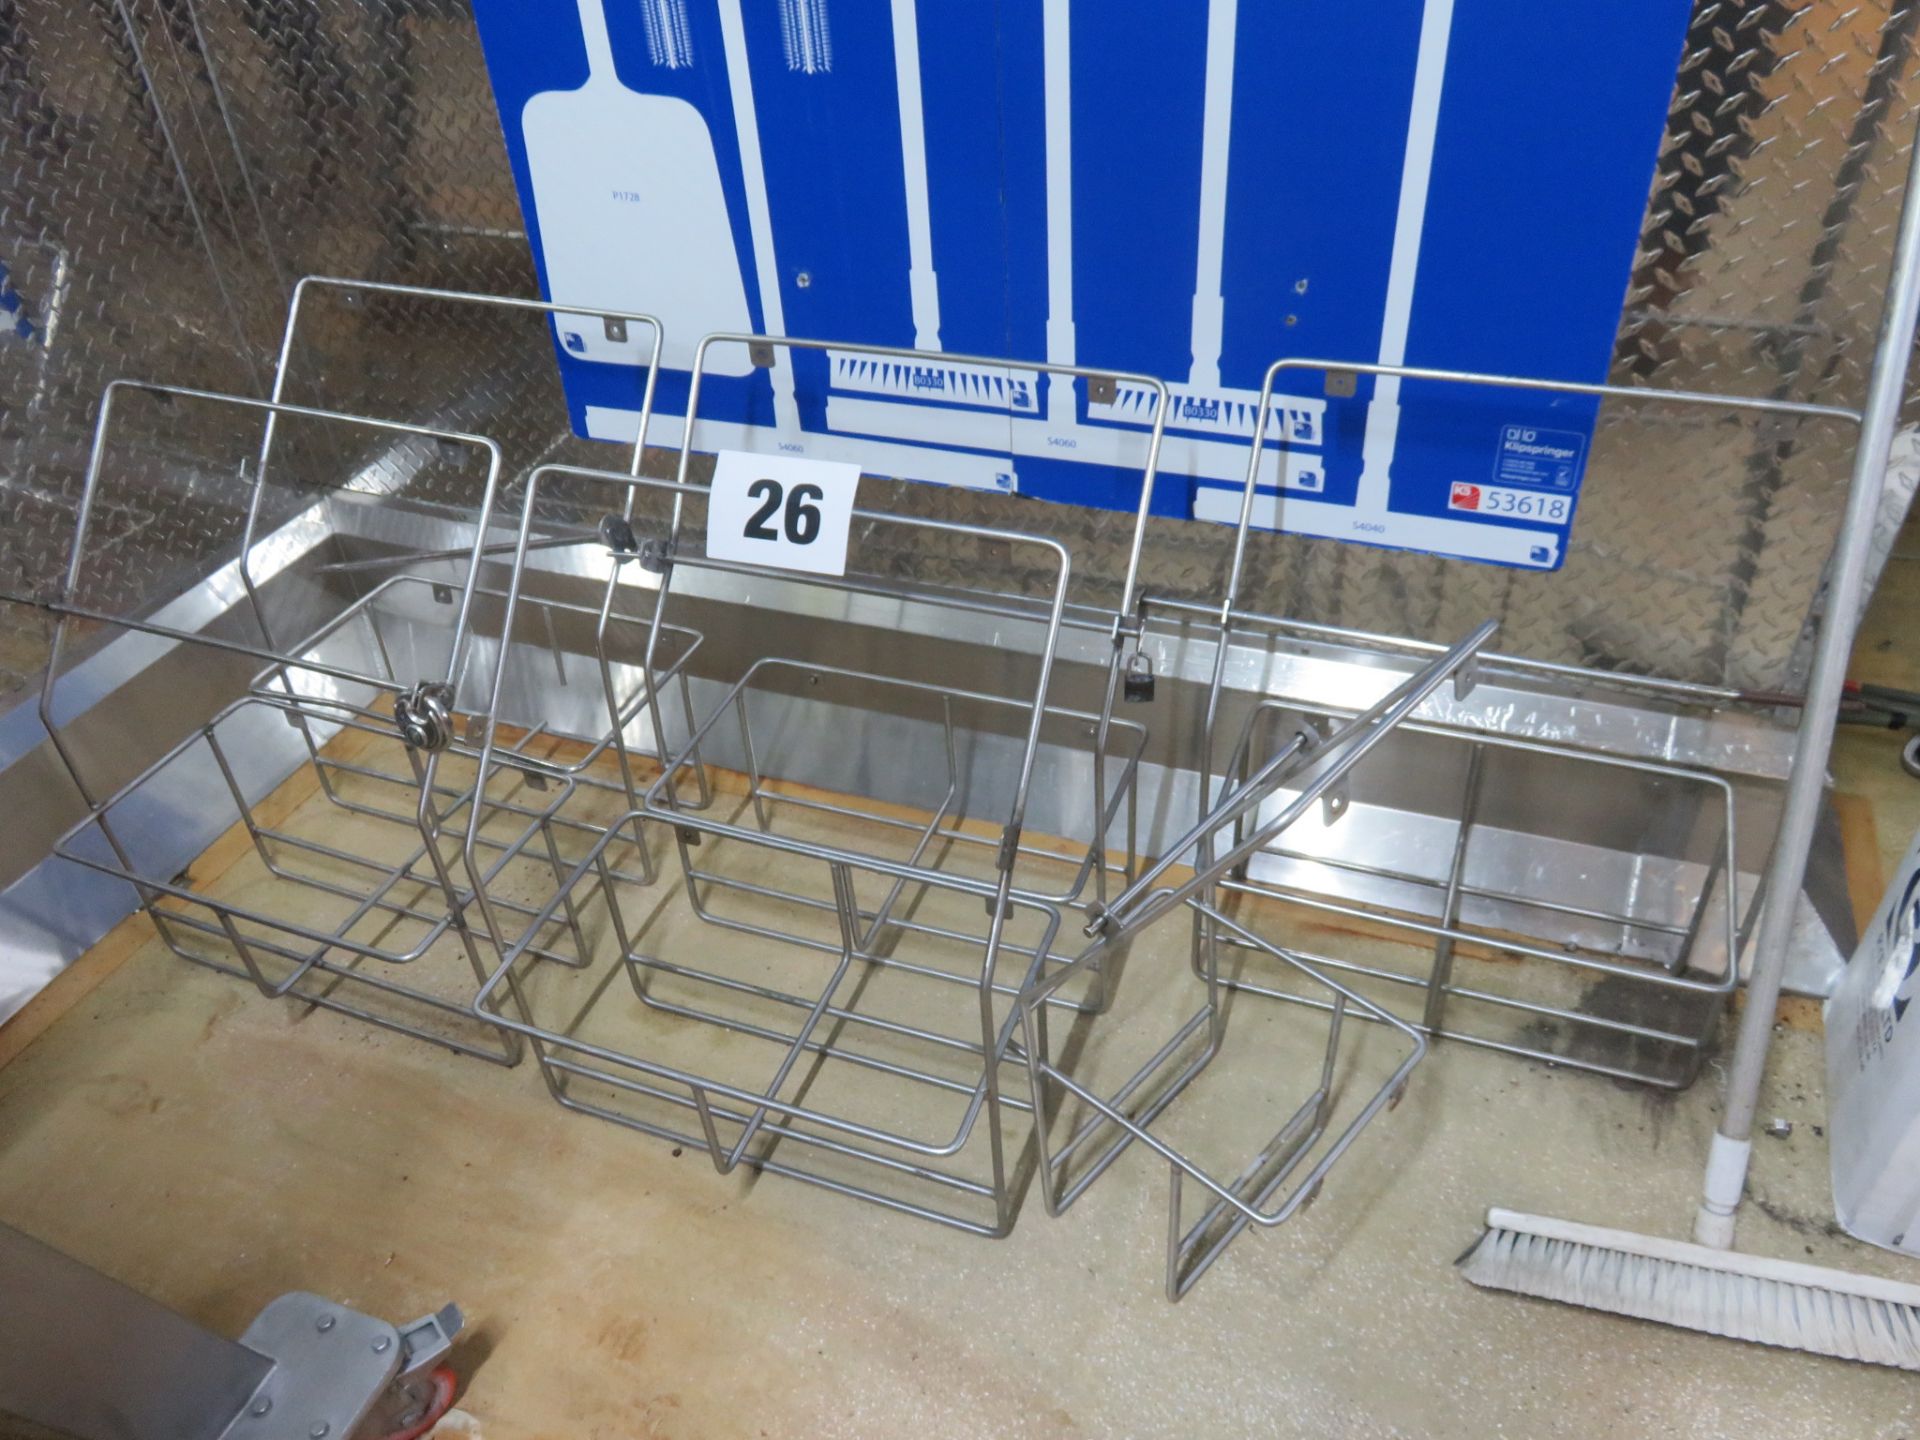 5 x Detergent bin Holders S/s. Wall mounted. 4 500 x 300; 1 250 x 300. Lift out £10 - Image 2 of 2